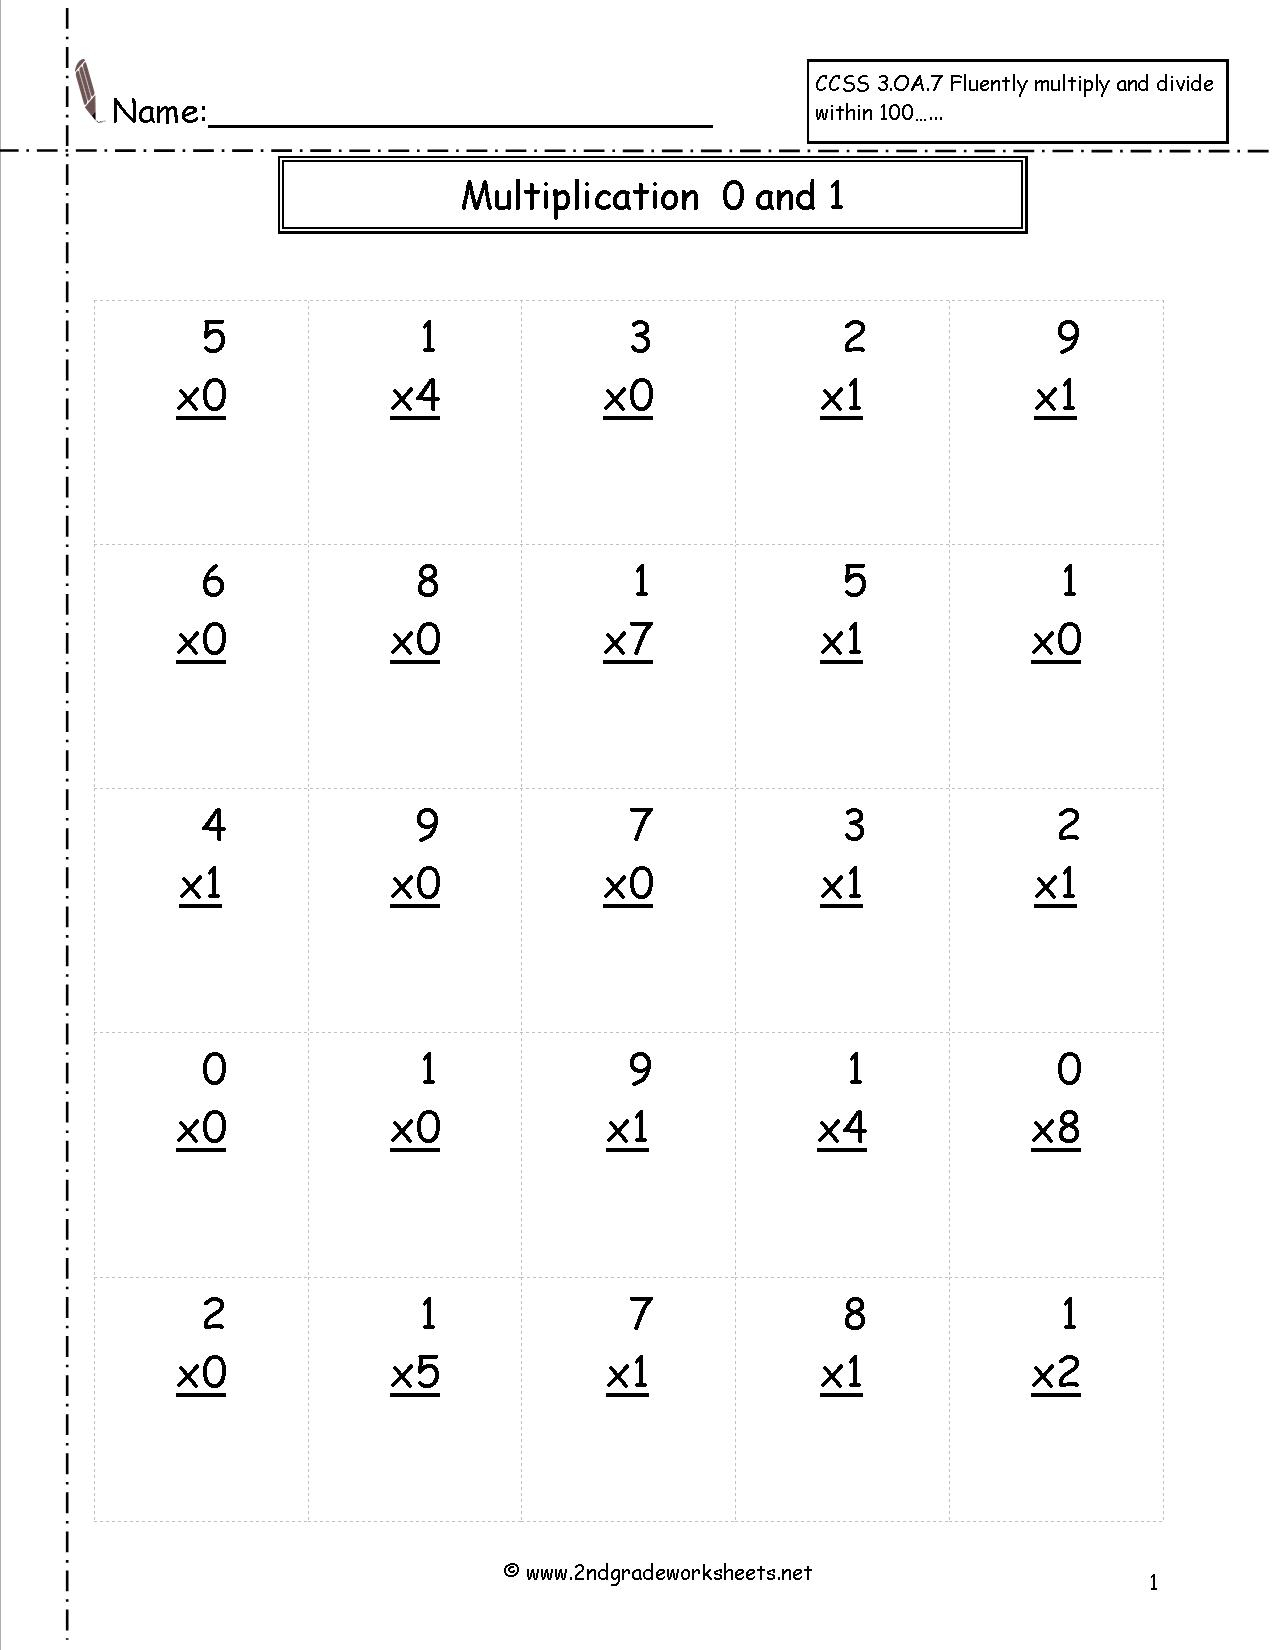 Multiplication Worksheets And Printouts with regard to Printable Multiplication Worksheet 0 And 1